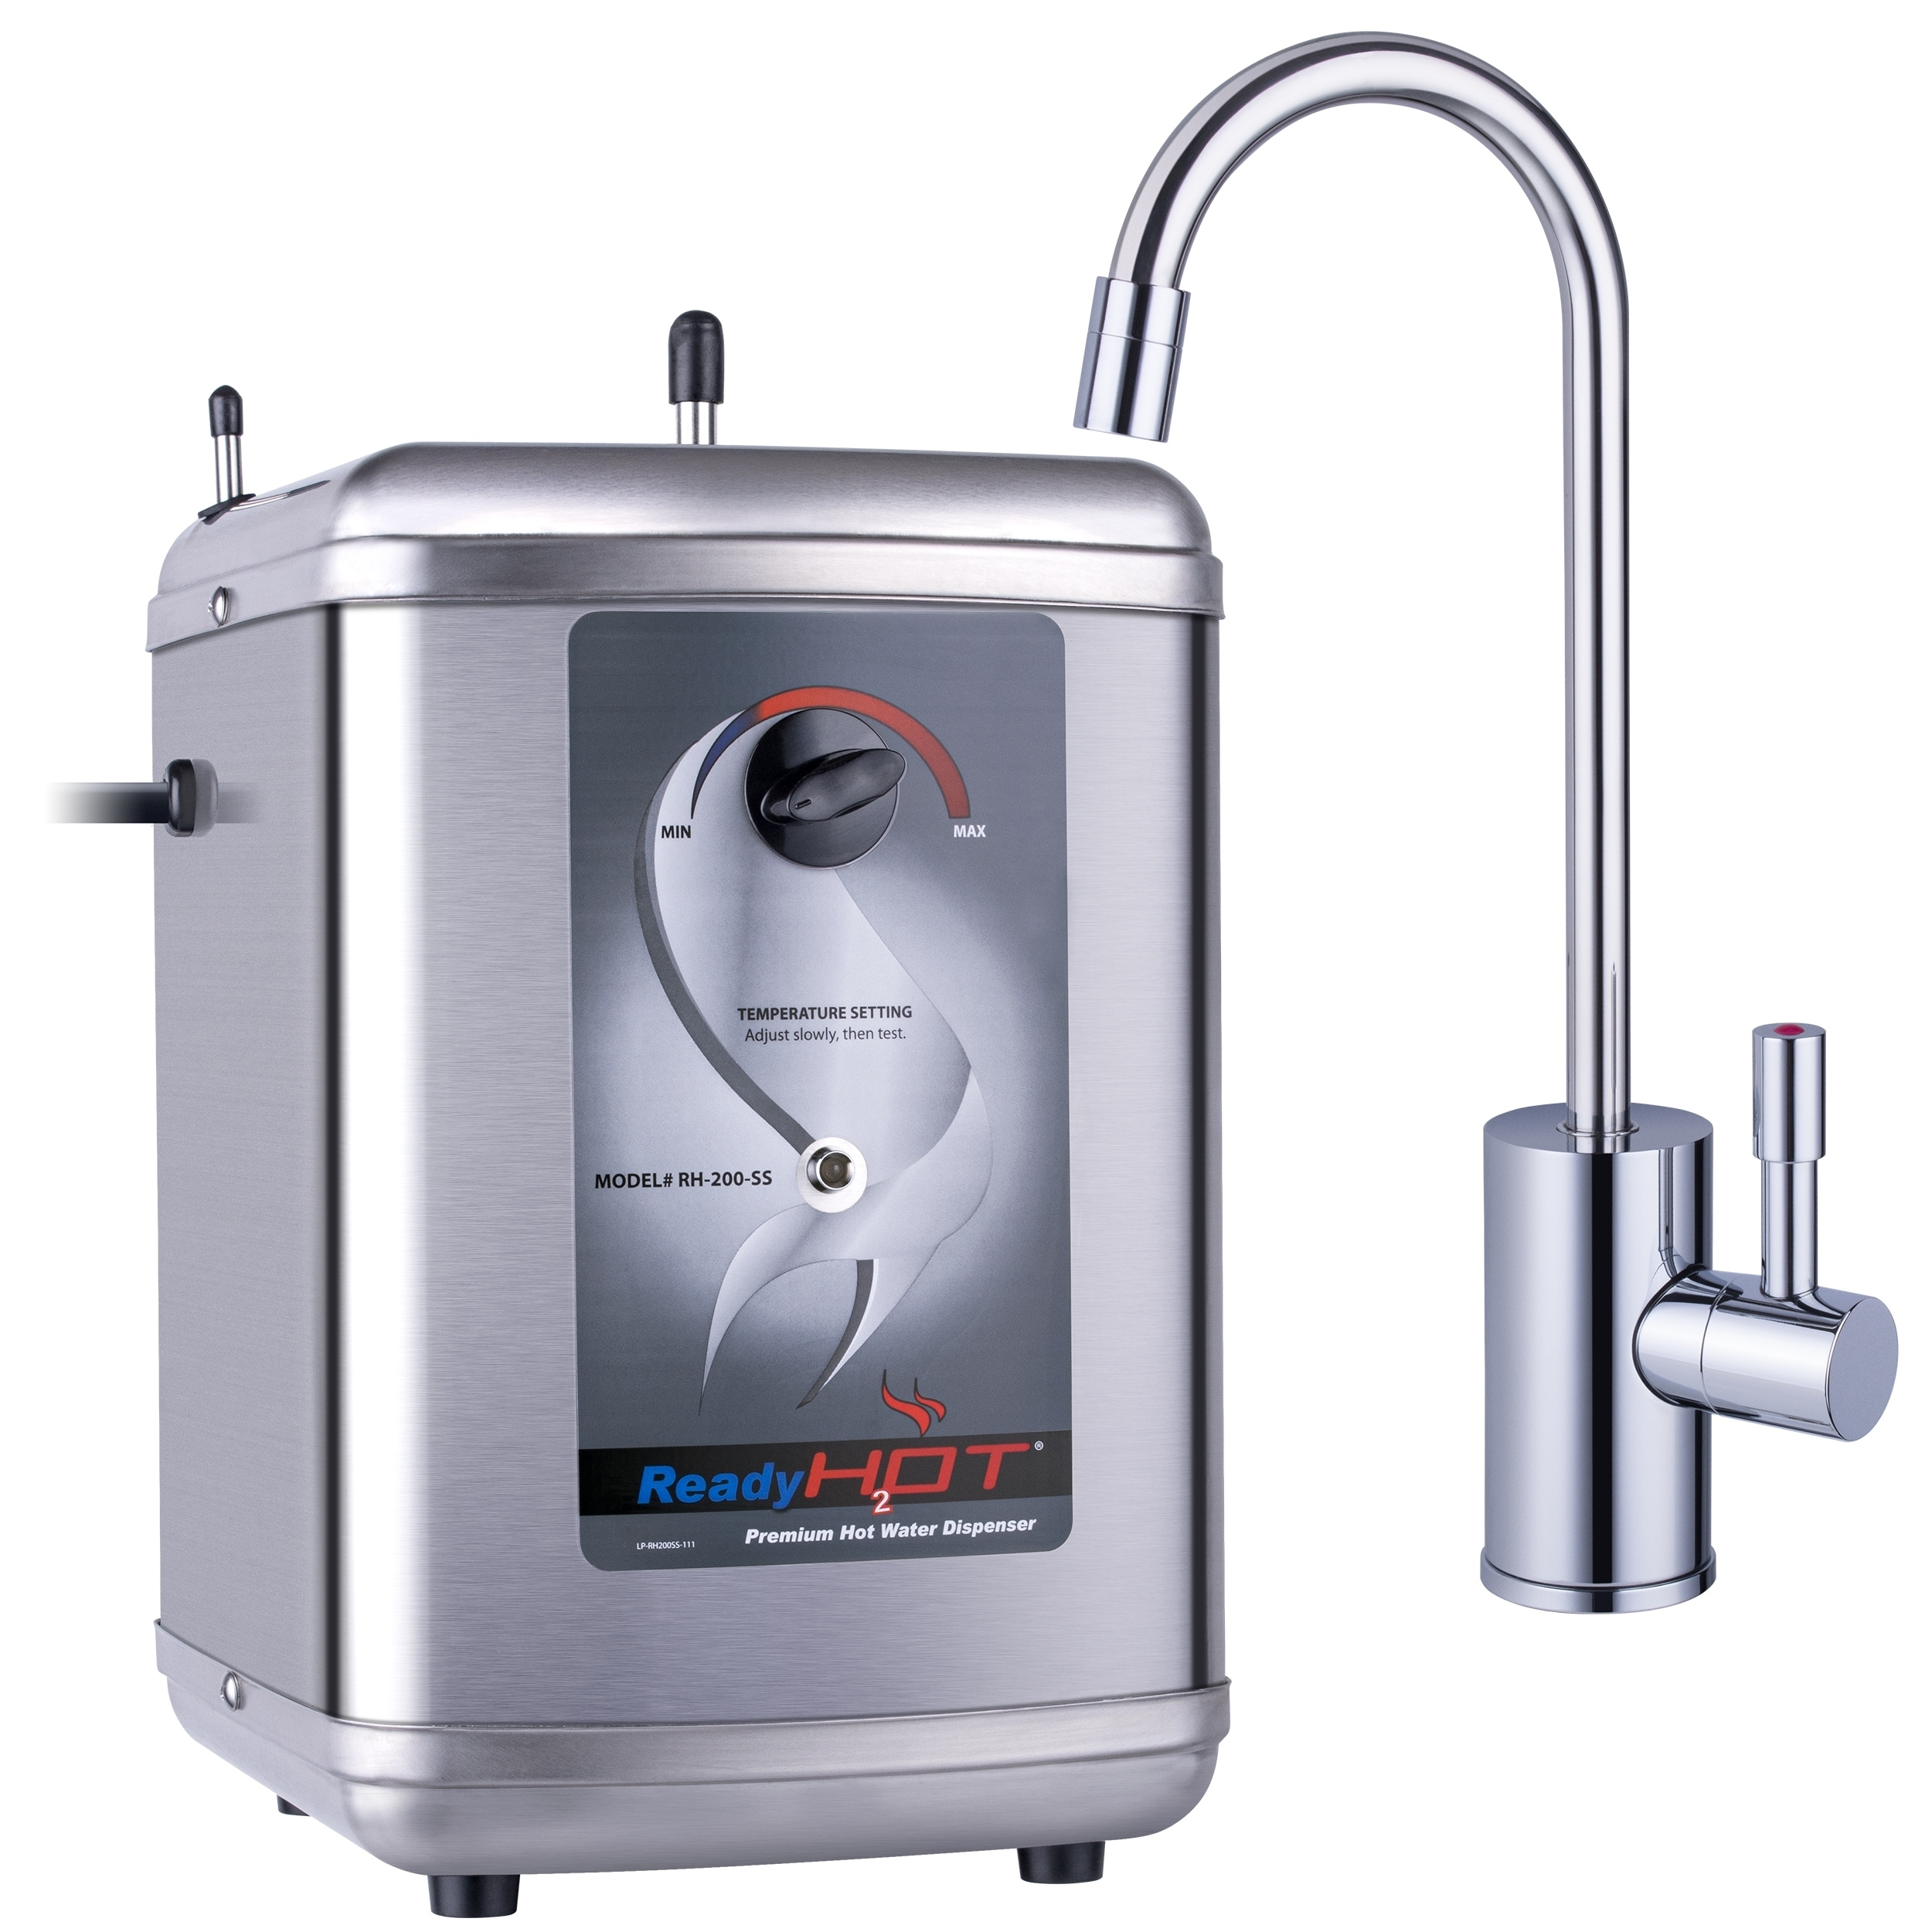 https://ak1.ostkcdn.com/images/products/is/images/direct/756dbb9862cc96599f7564c993390efe63623055/ReadyHot-Stainless-Steel-Instant-Hot-Water-Dispenser-w--CHROME-Faucet.jpg